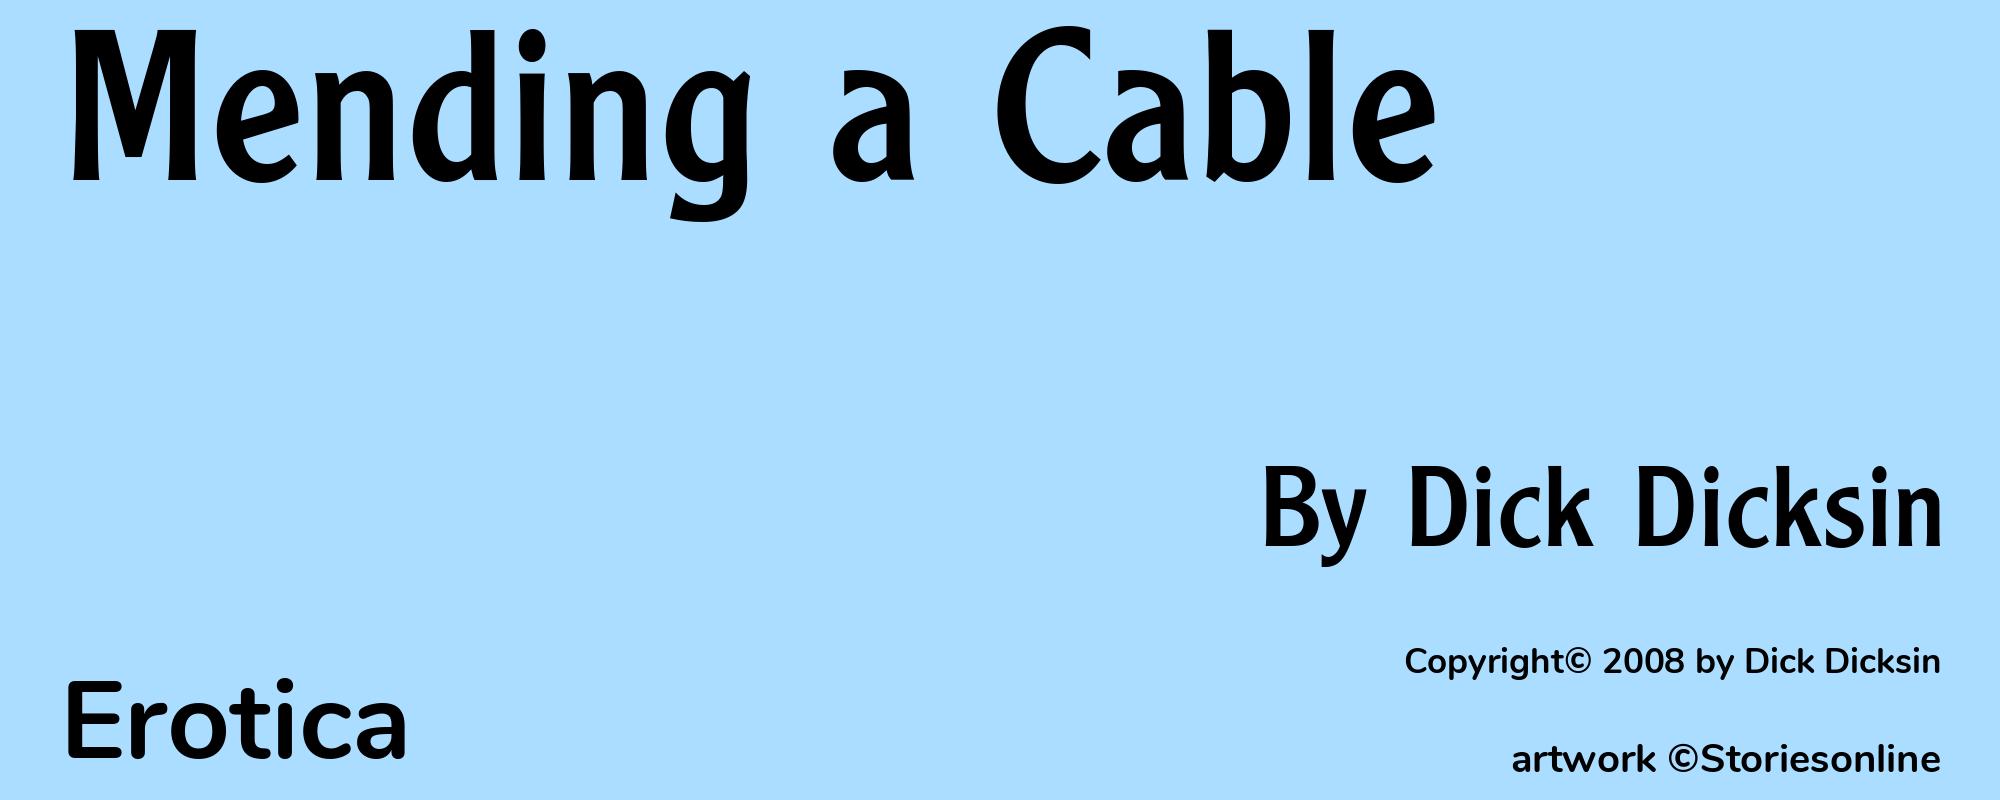 Mending a Cable - Cover